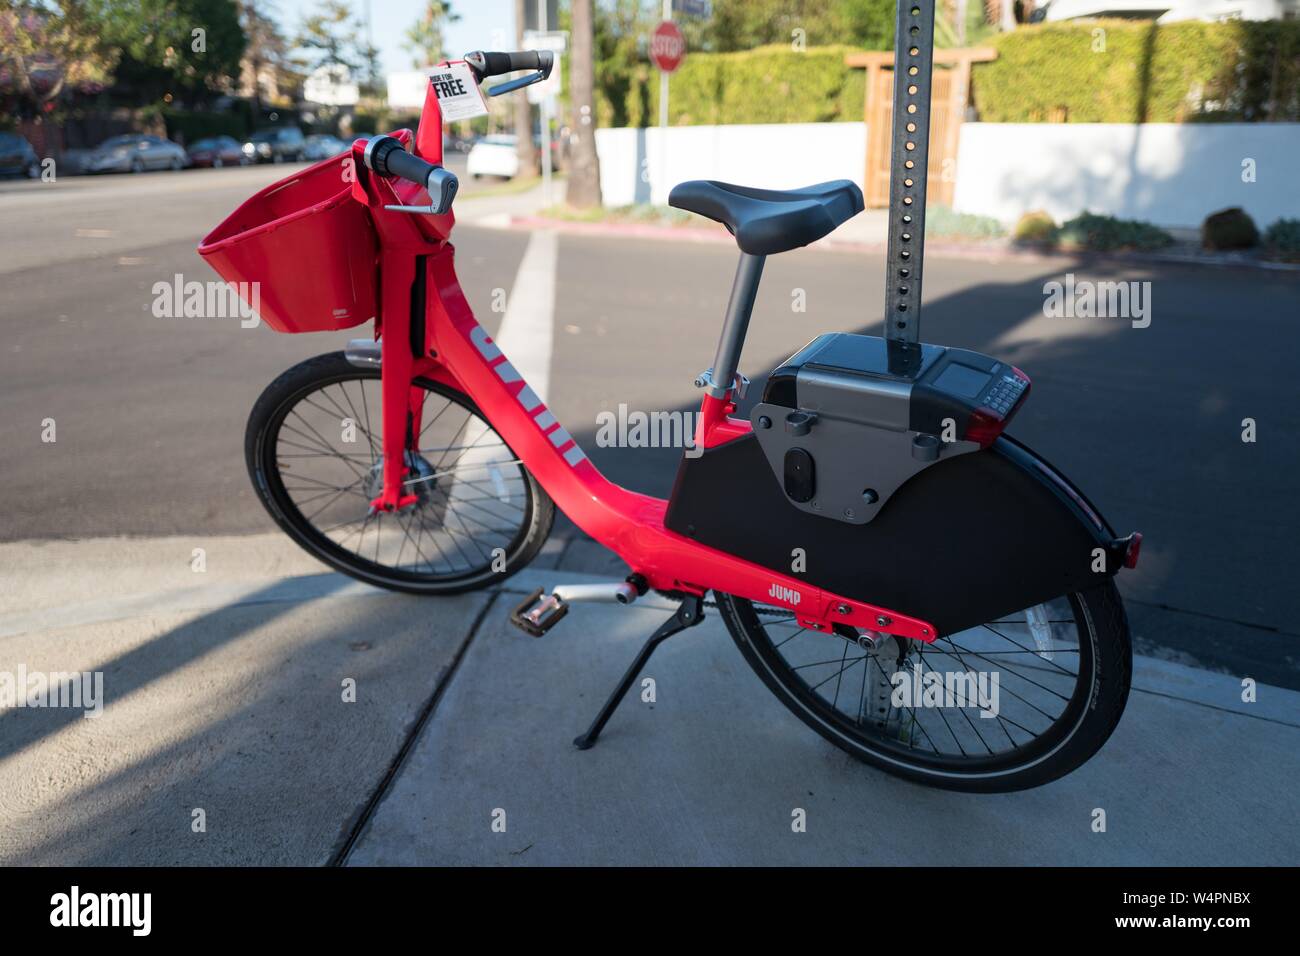 Full length view of dockless electric bicycle from sharing economy company Jump, an affiliate of Uber Inc, parked on a street in the Marina Del Rey neighborhood of Los Angeles, California, October 21, 2018. () Stock Photo